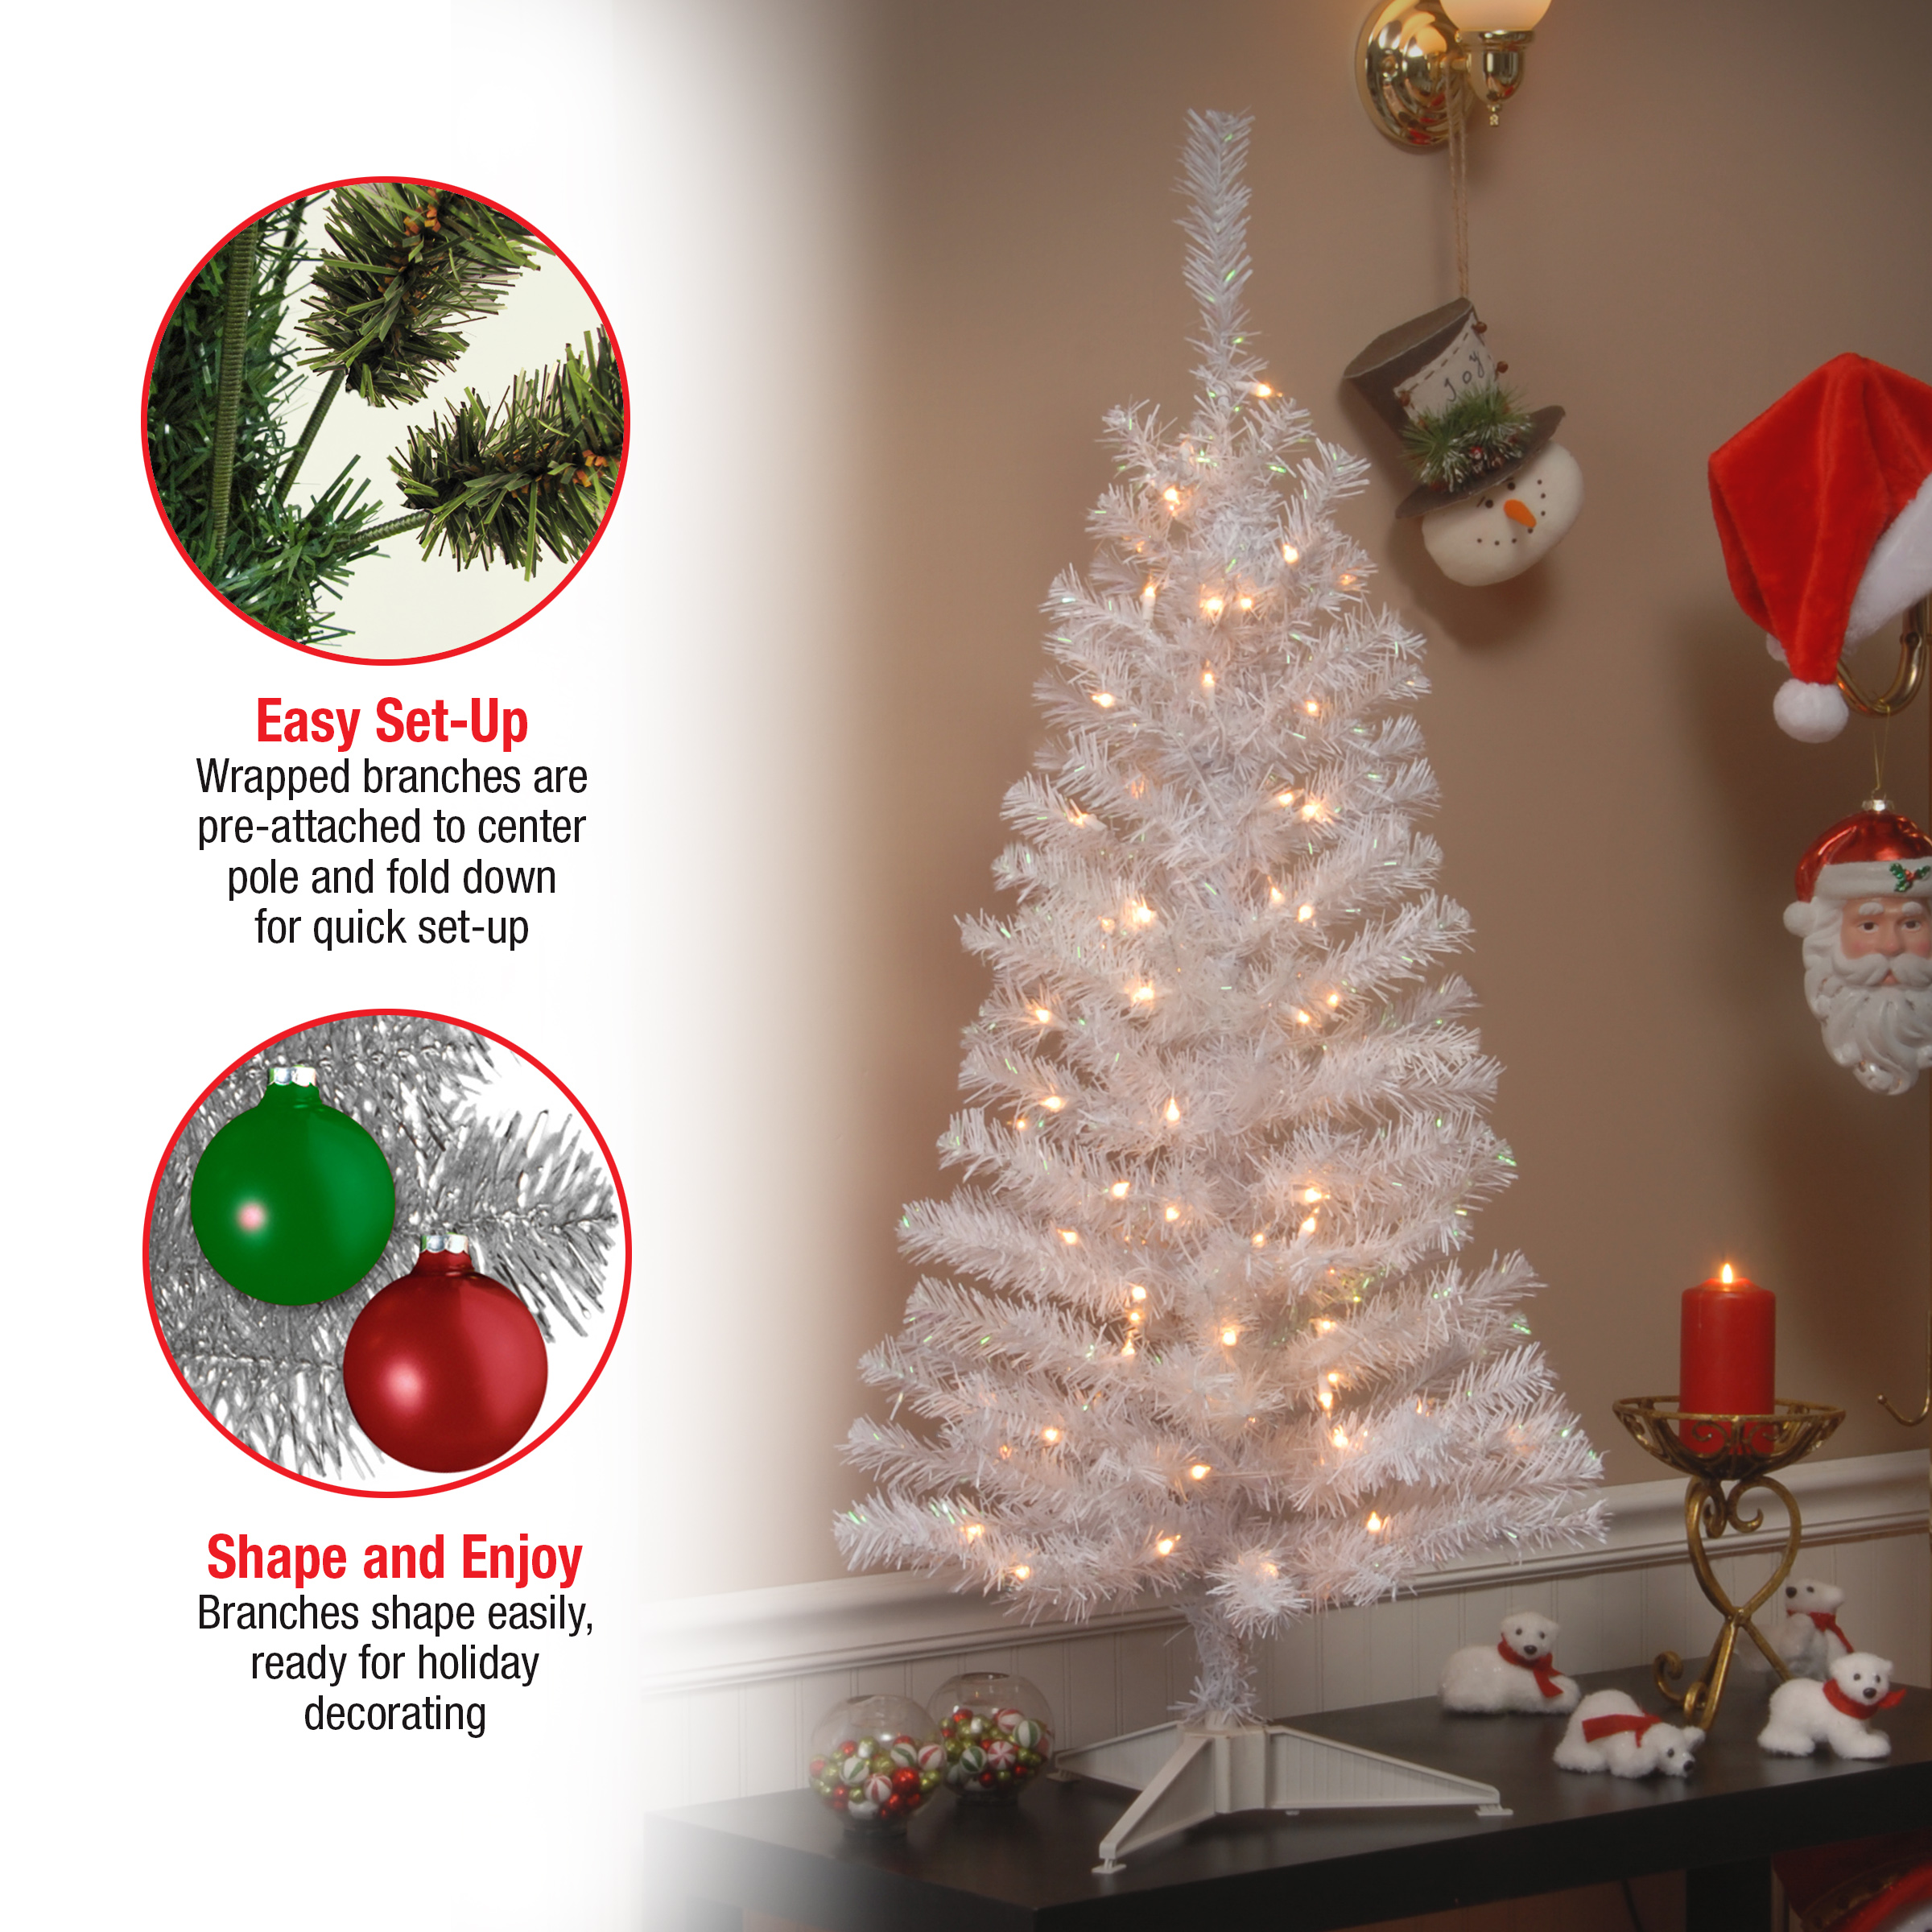 National Tree Company Pre-Lit Artificial Christmas Tree, White Tinsel, White Lights, Includes Stand, 4 feet - image 4 of 6